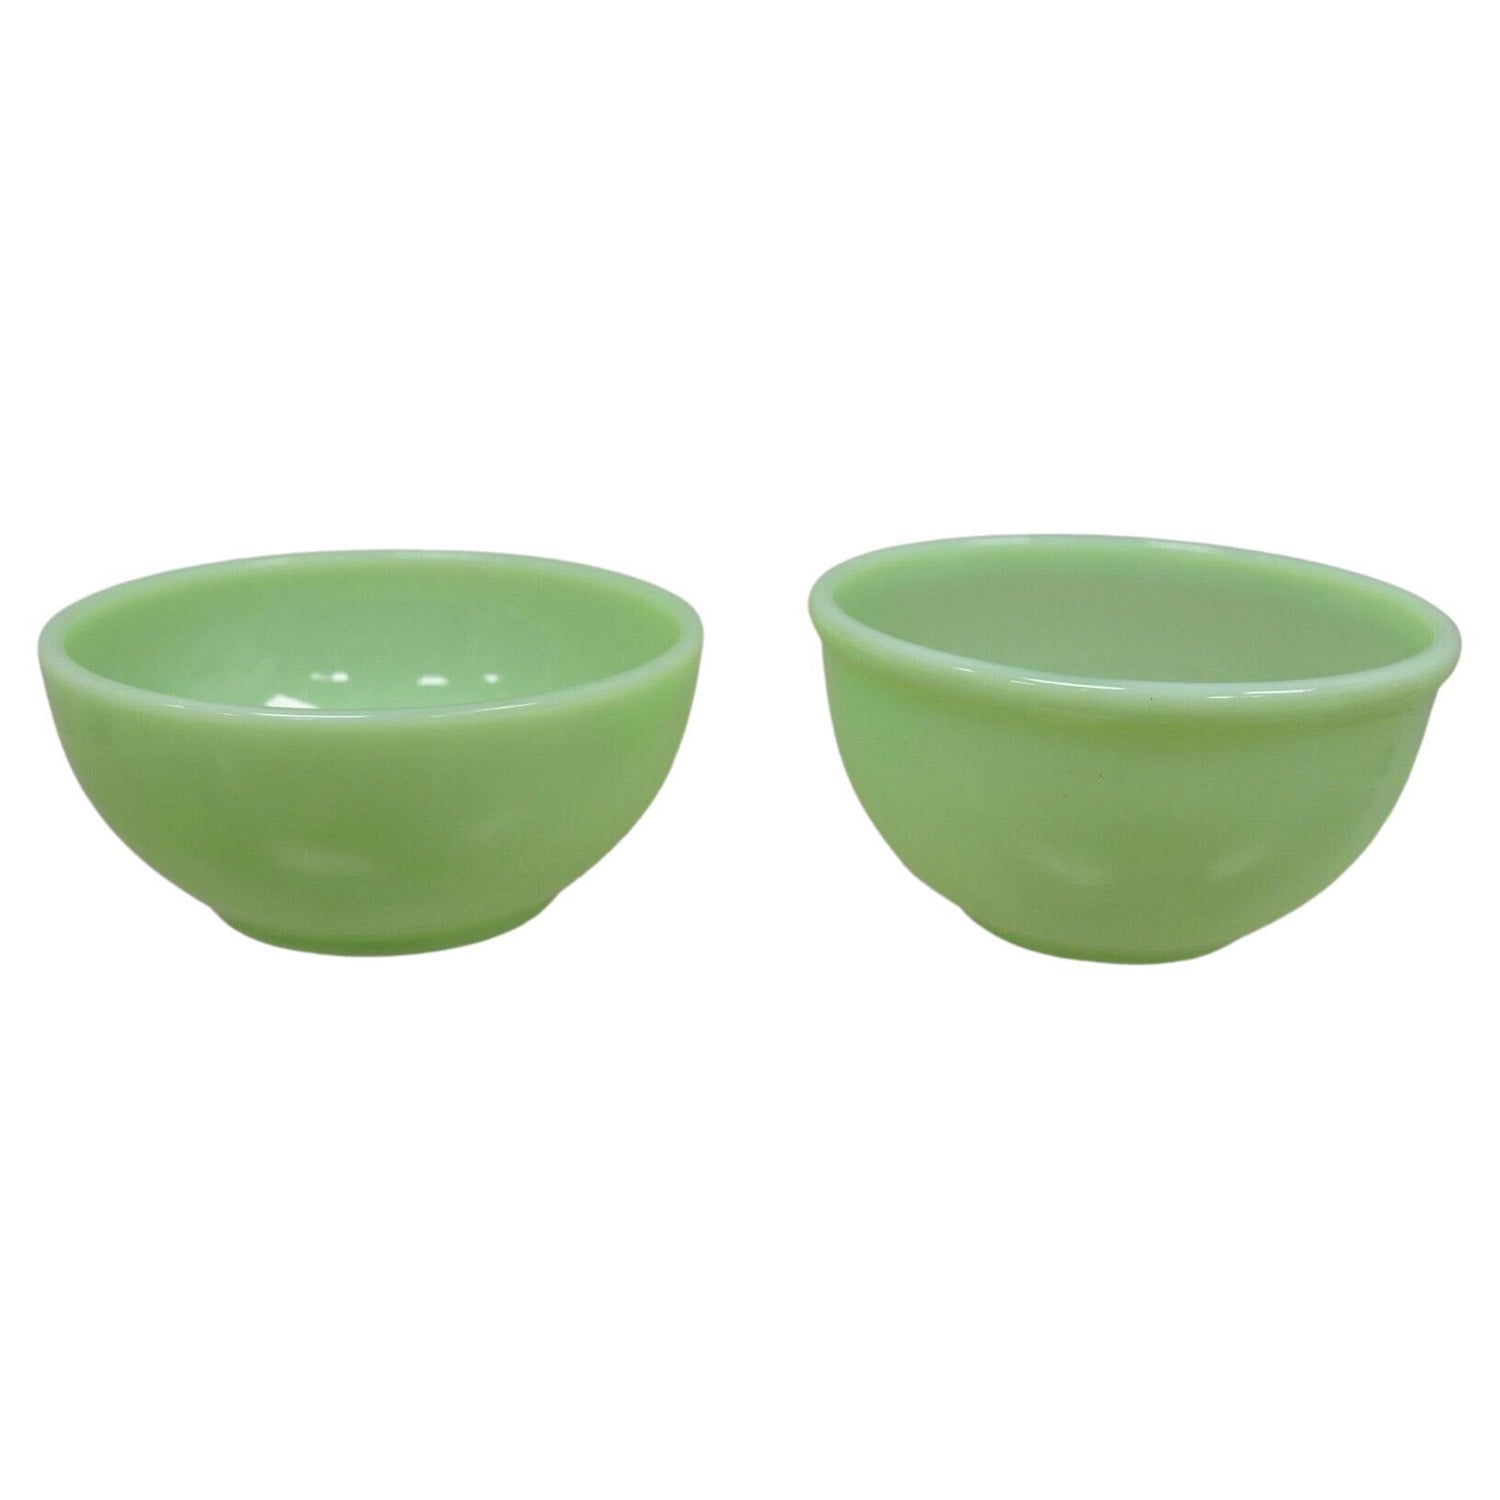 https://a.1stdibscdn.com/vtg-fire-king-jadeite-green-13-oven-ware-5-round-cereal-chili-soup-bowl-2-pcs-for-sale/f_9341/f_308967921666093208709/f_30896792_1666093209037_bg_processed.jpg?width=1500